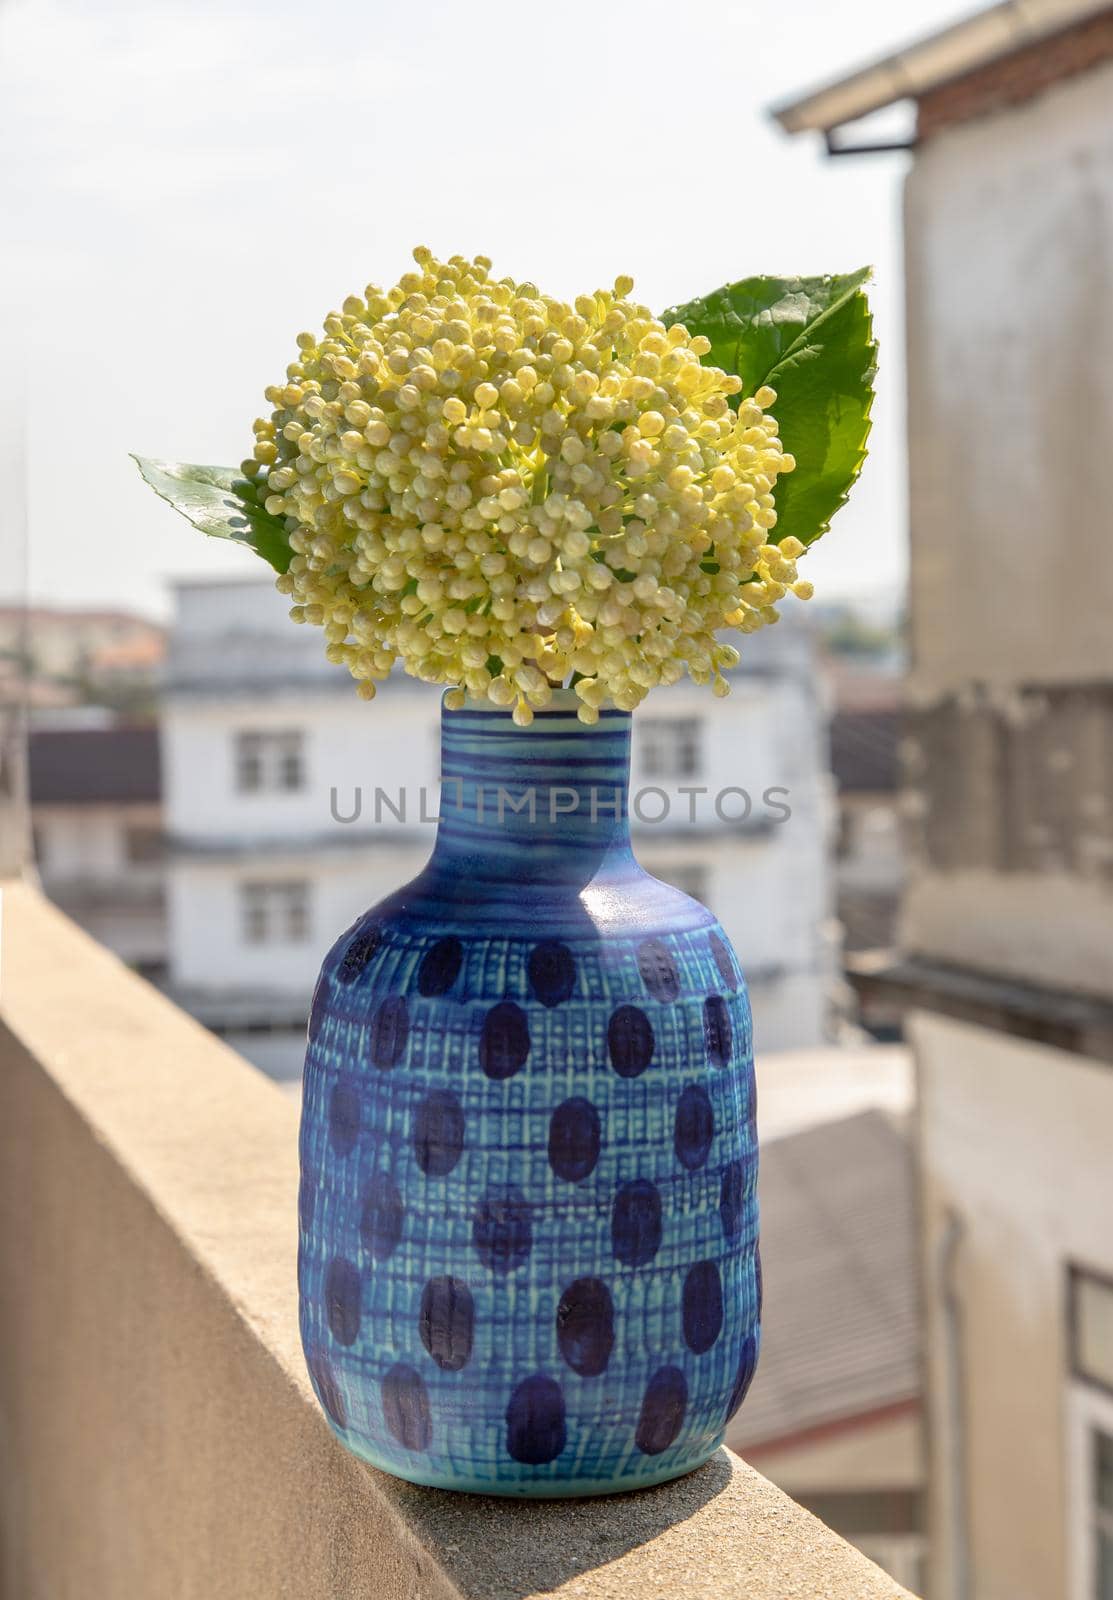 A bouquet of flowers in a blue ceramic vase on old cement wall at the balcony house. Home decor, select focus.